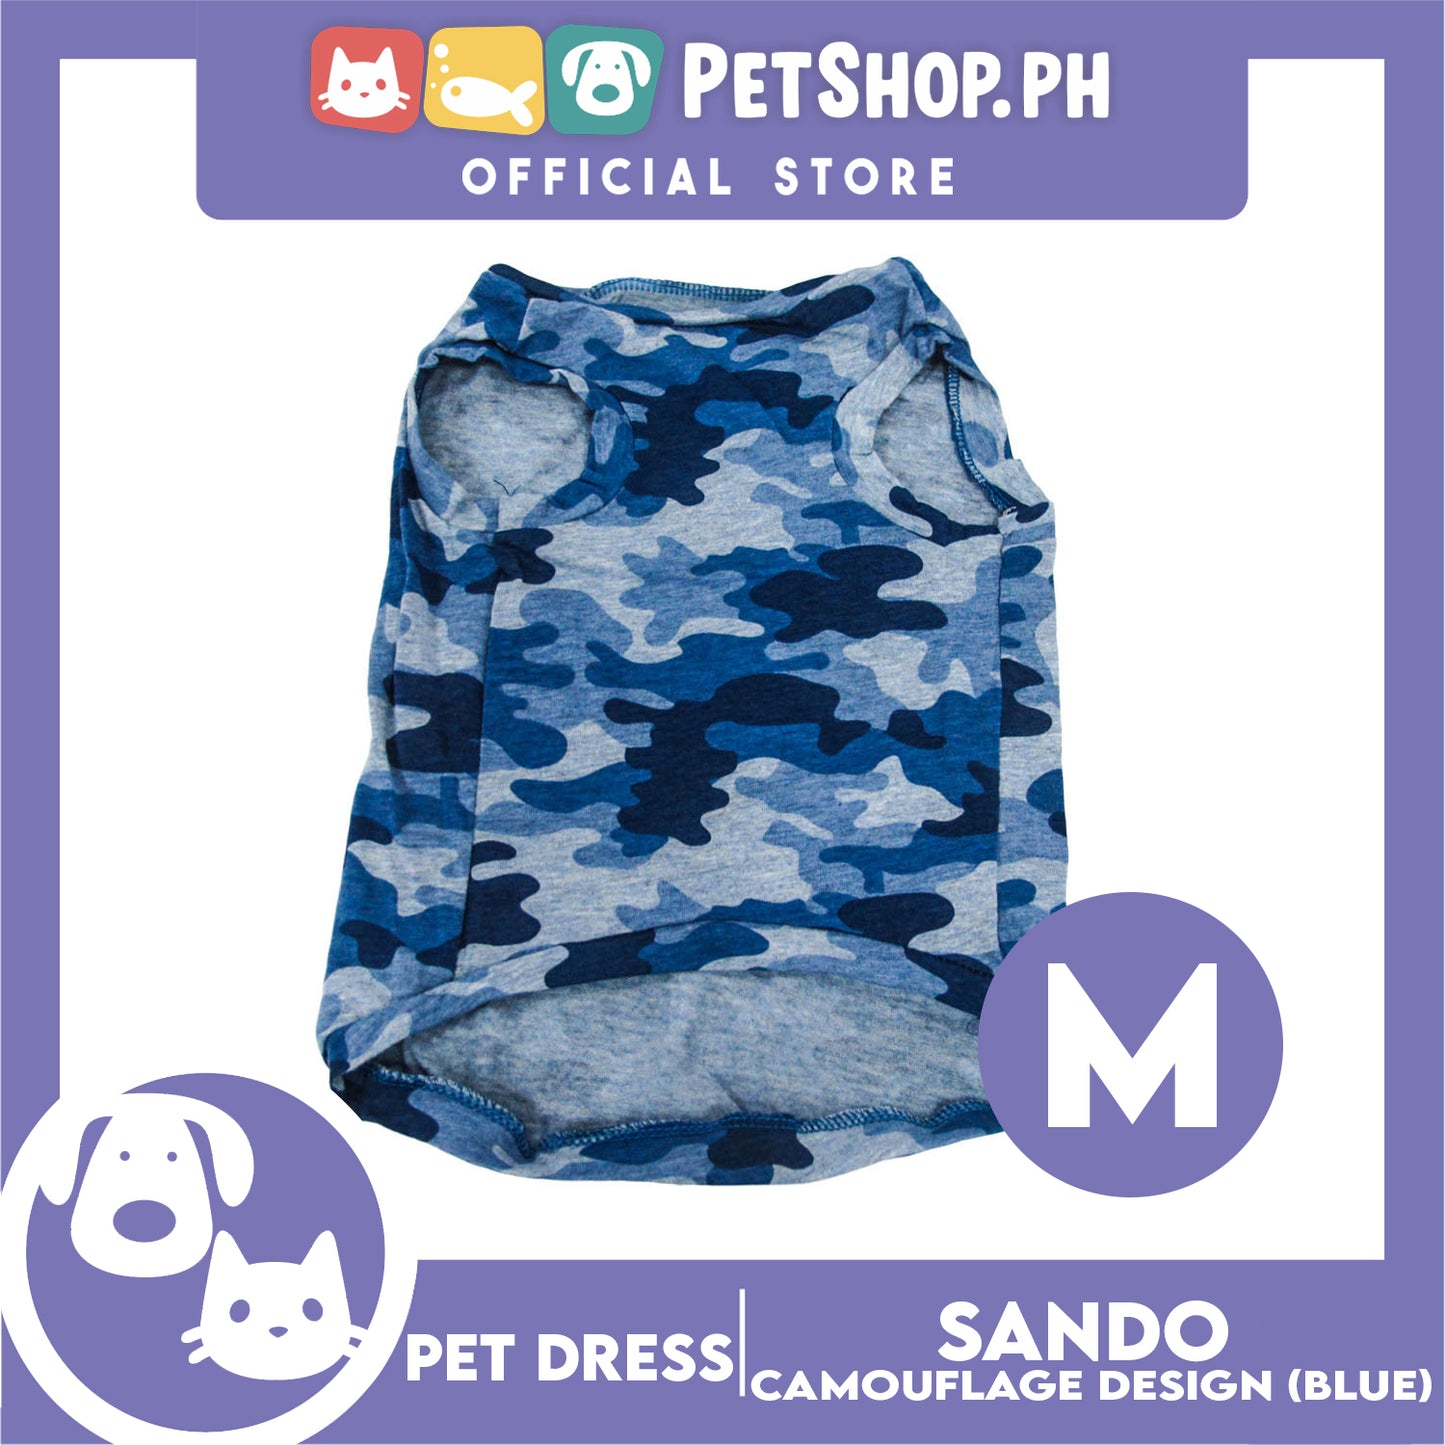 Pet Shirt Camouflage Design Sleeveless Blue (Medium) for Puppy, Small Dogs and Cats- Sando Breathable Clothes, Pet T-shirt